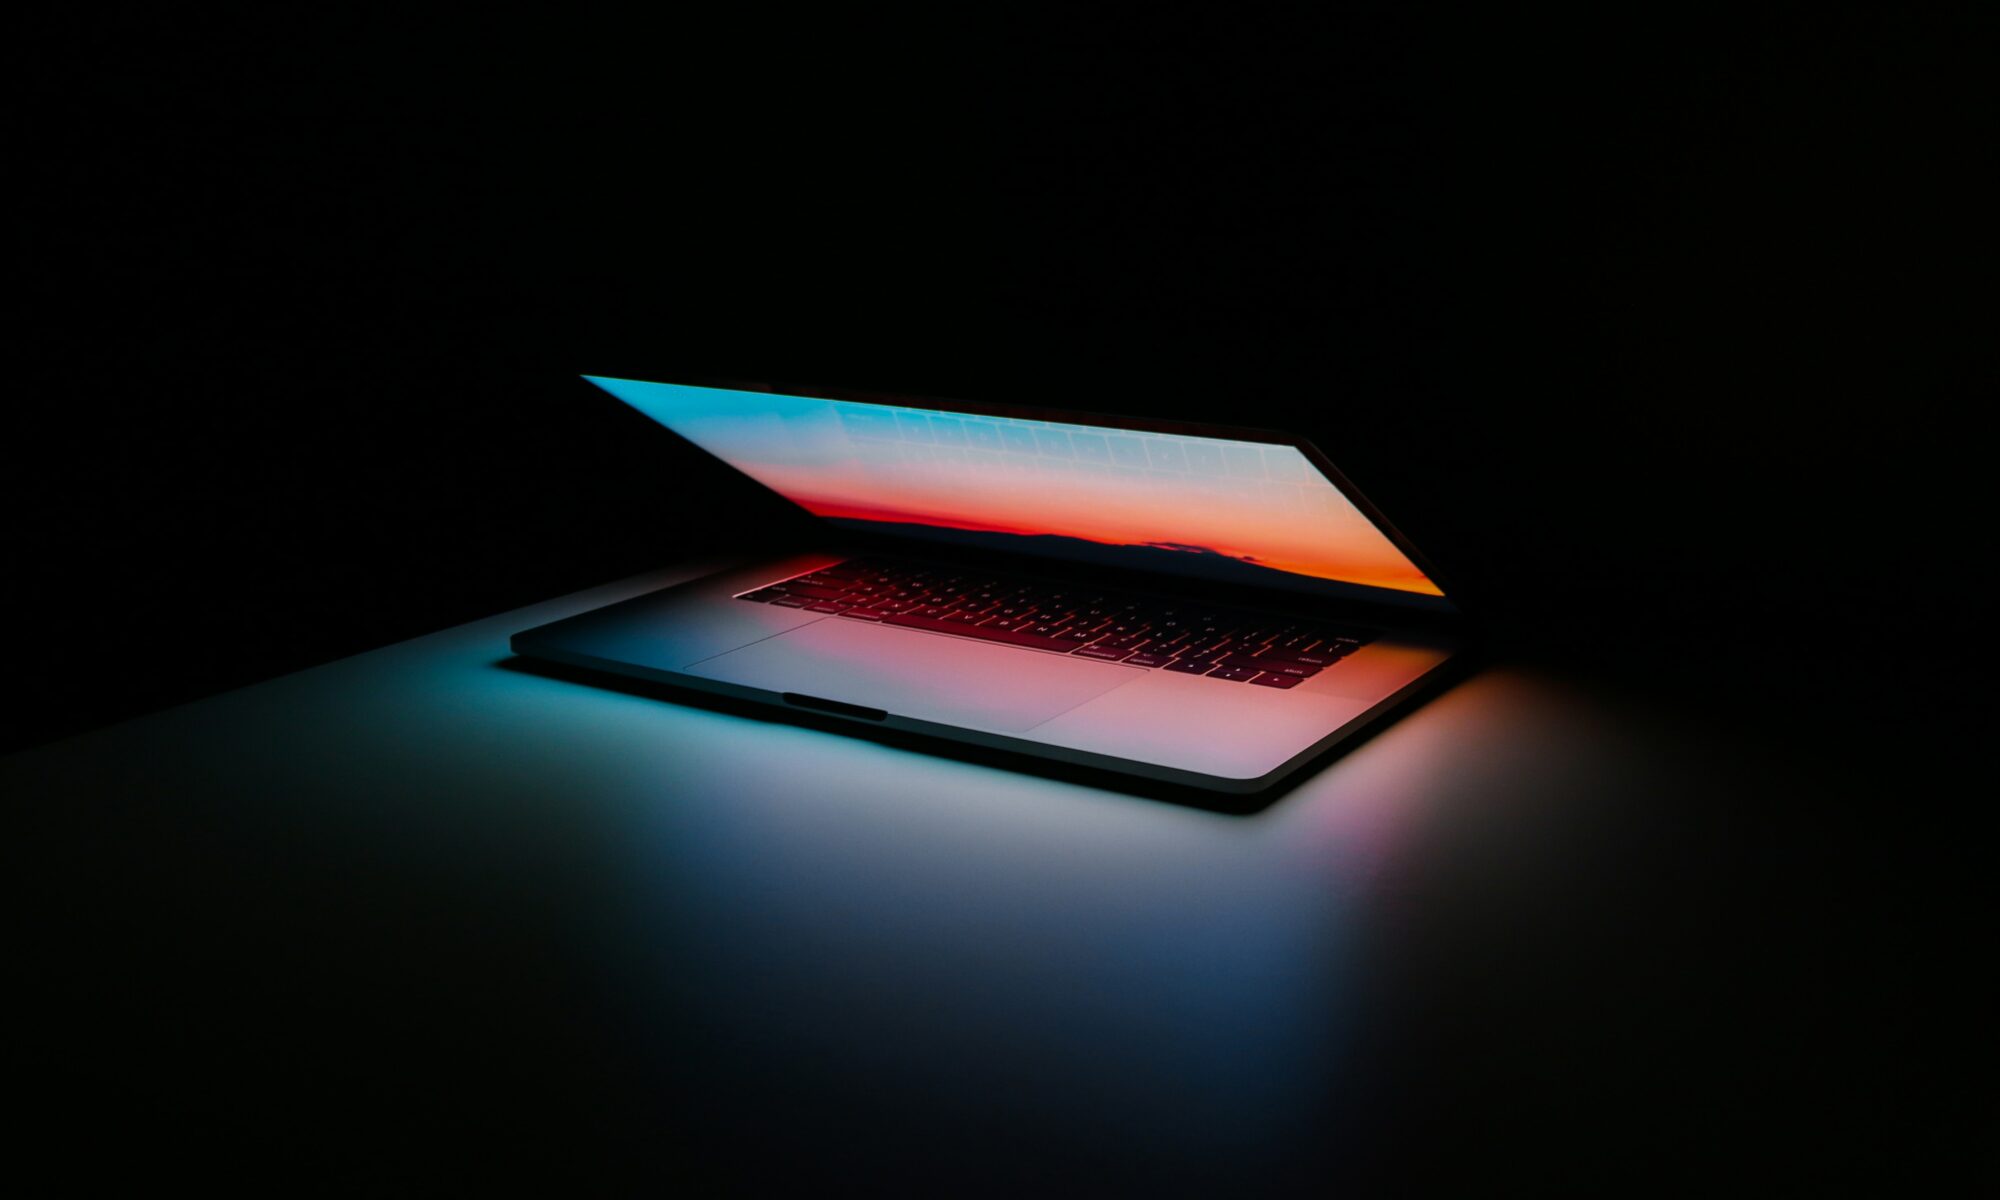 Image of a glowing laptop